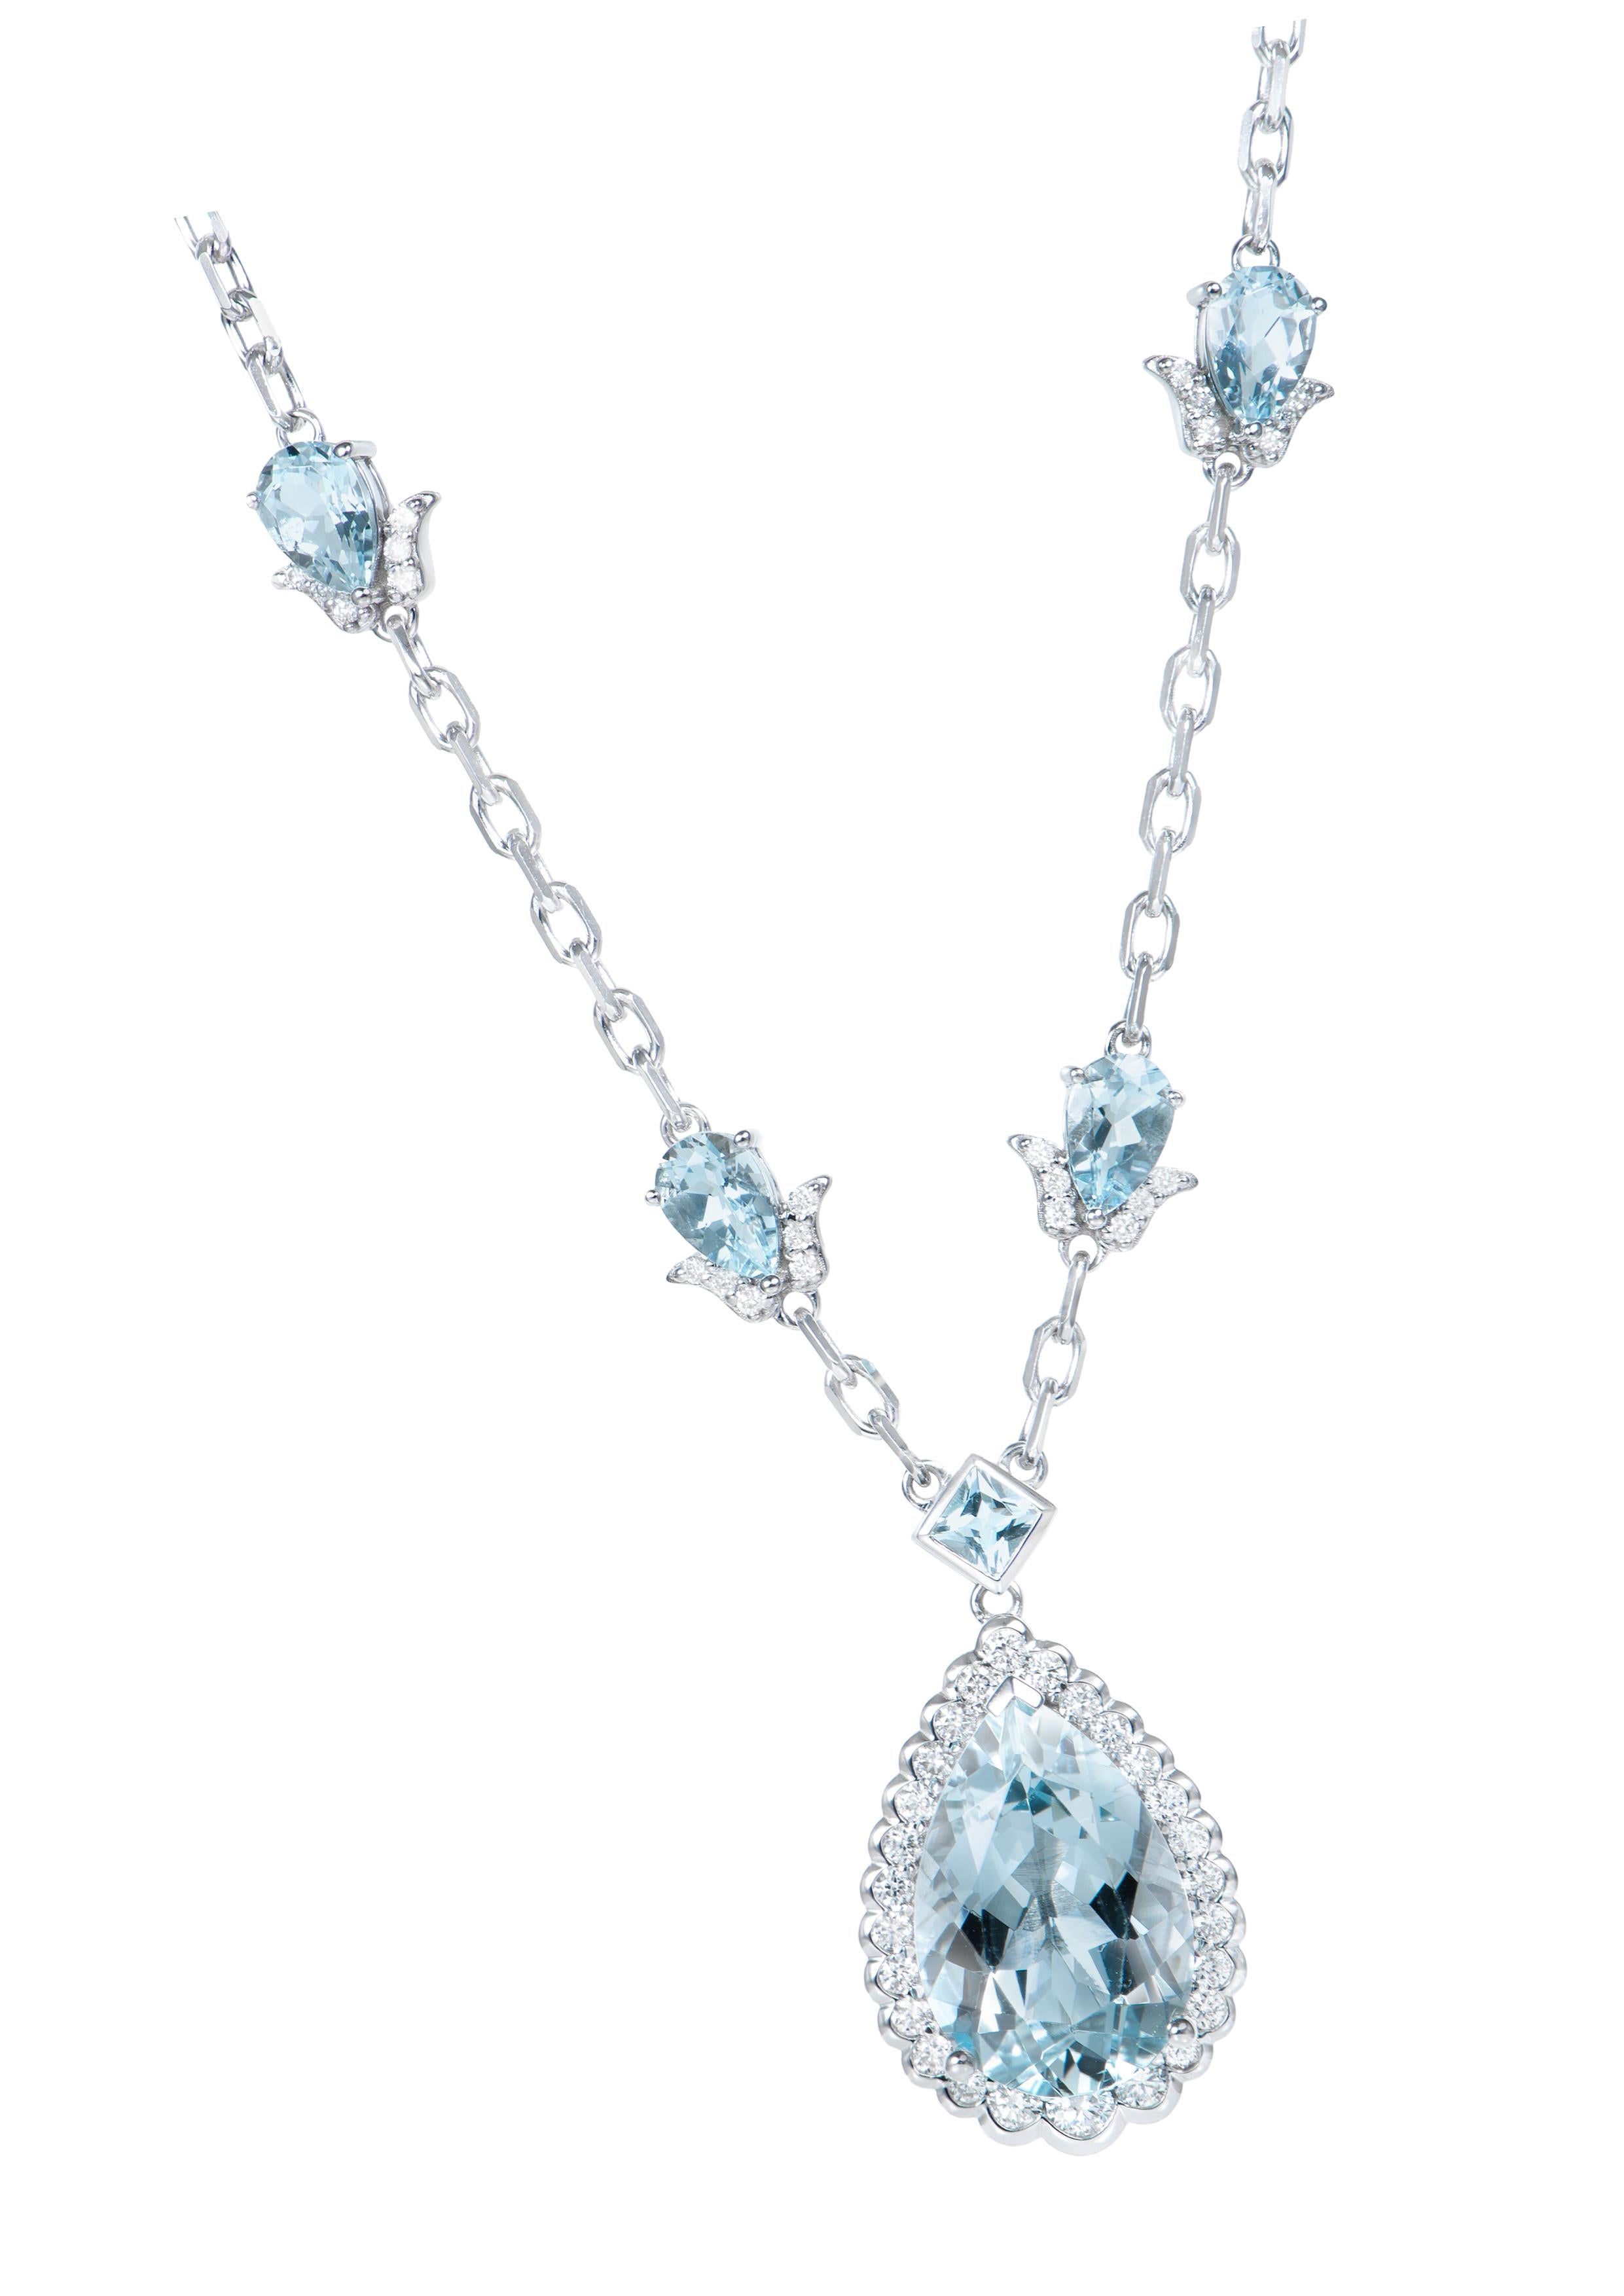 An exclusive collection of designer and unique Pendant by Sunita Nahata Fine Design.
Accented with diamonds these Pendants are made in White gold and present a classic yet elegant look. 

Aquamarine Pendant with White Diamond in 18 Karat White